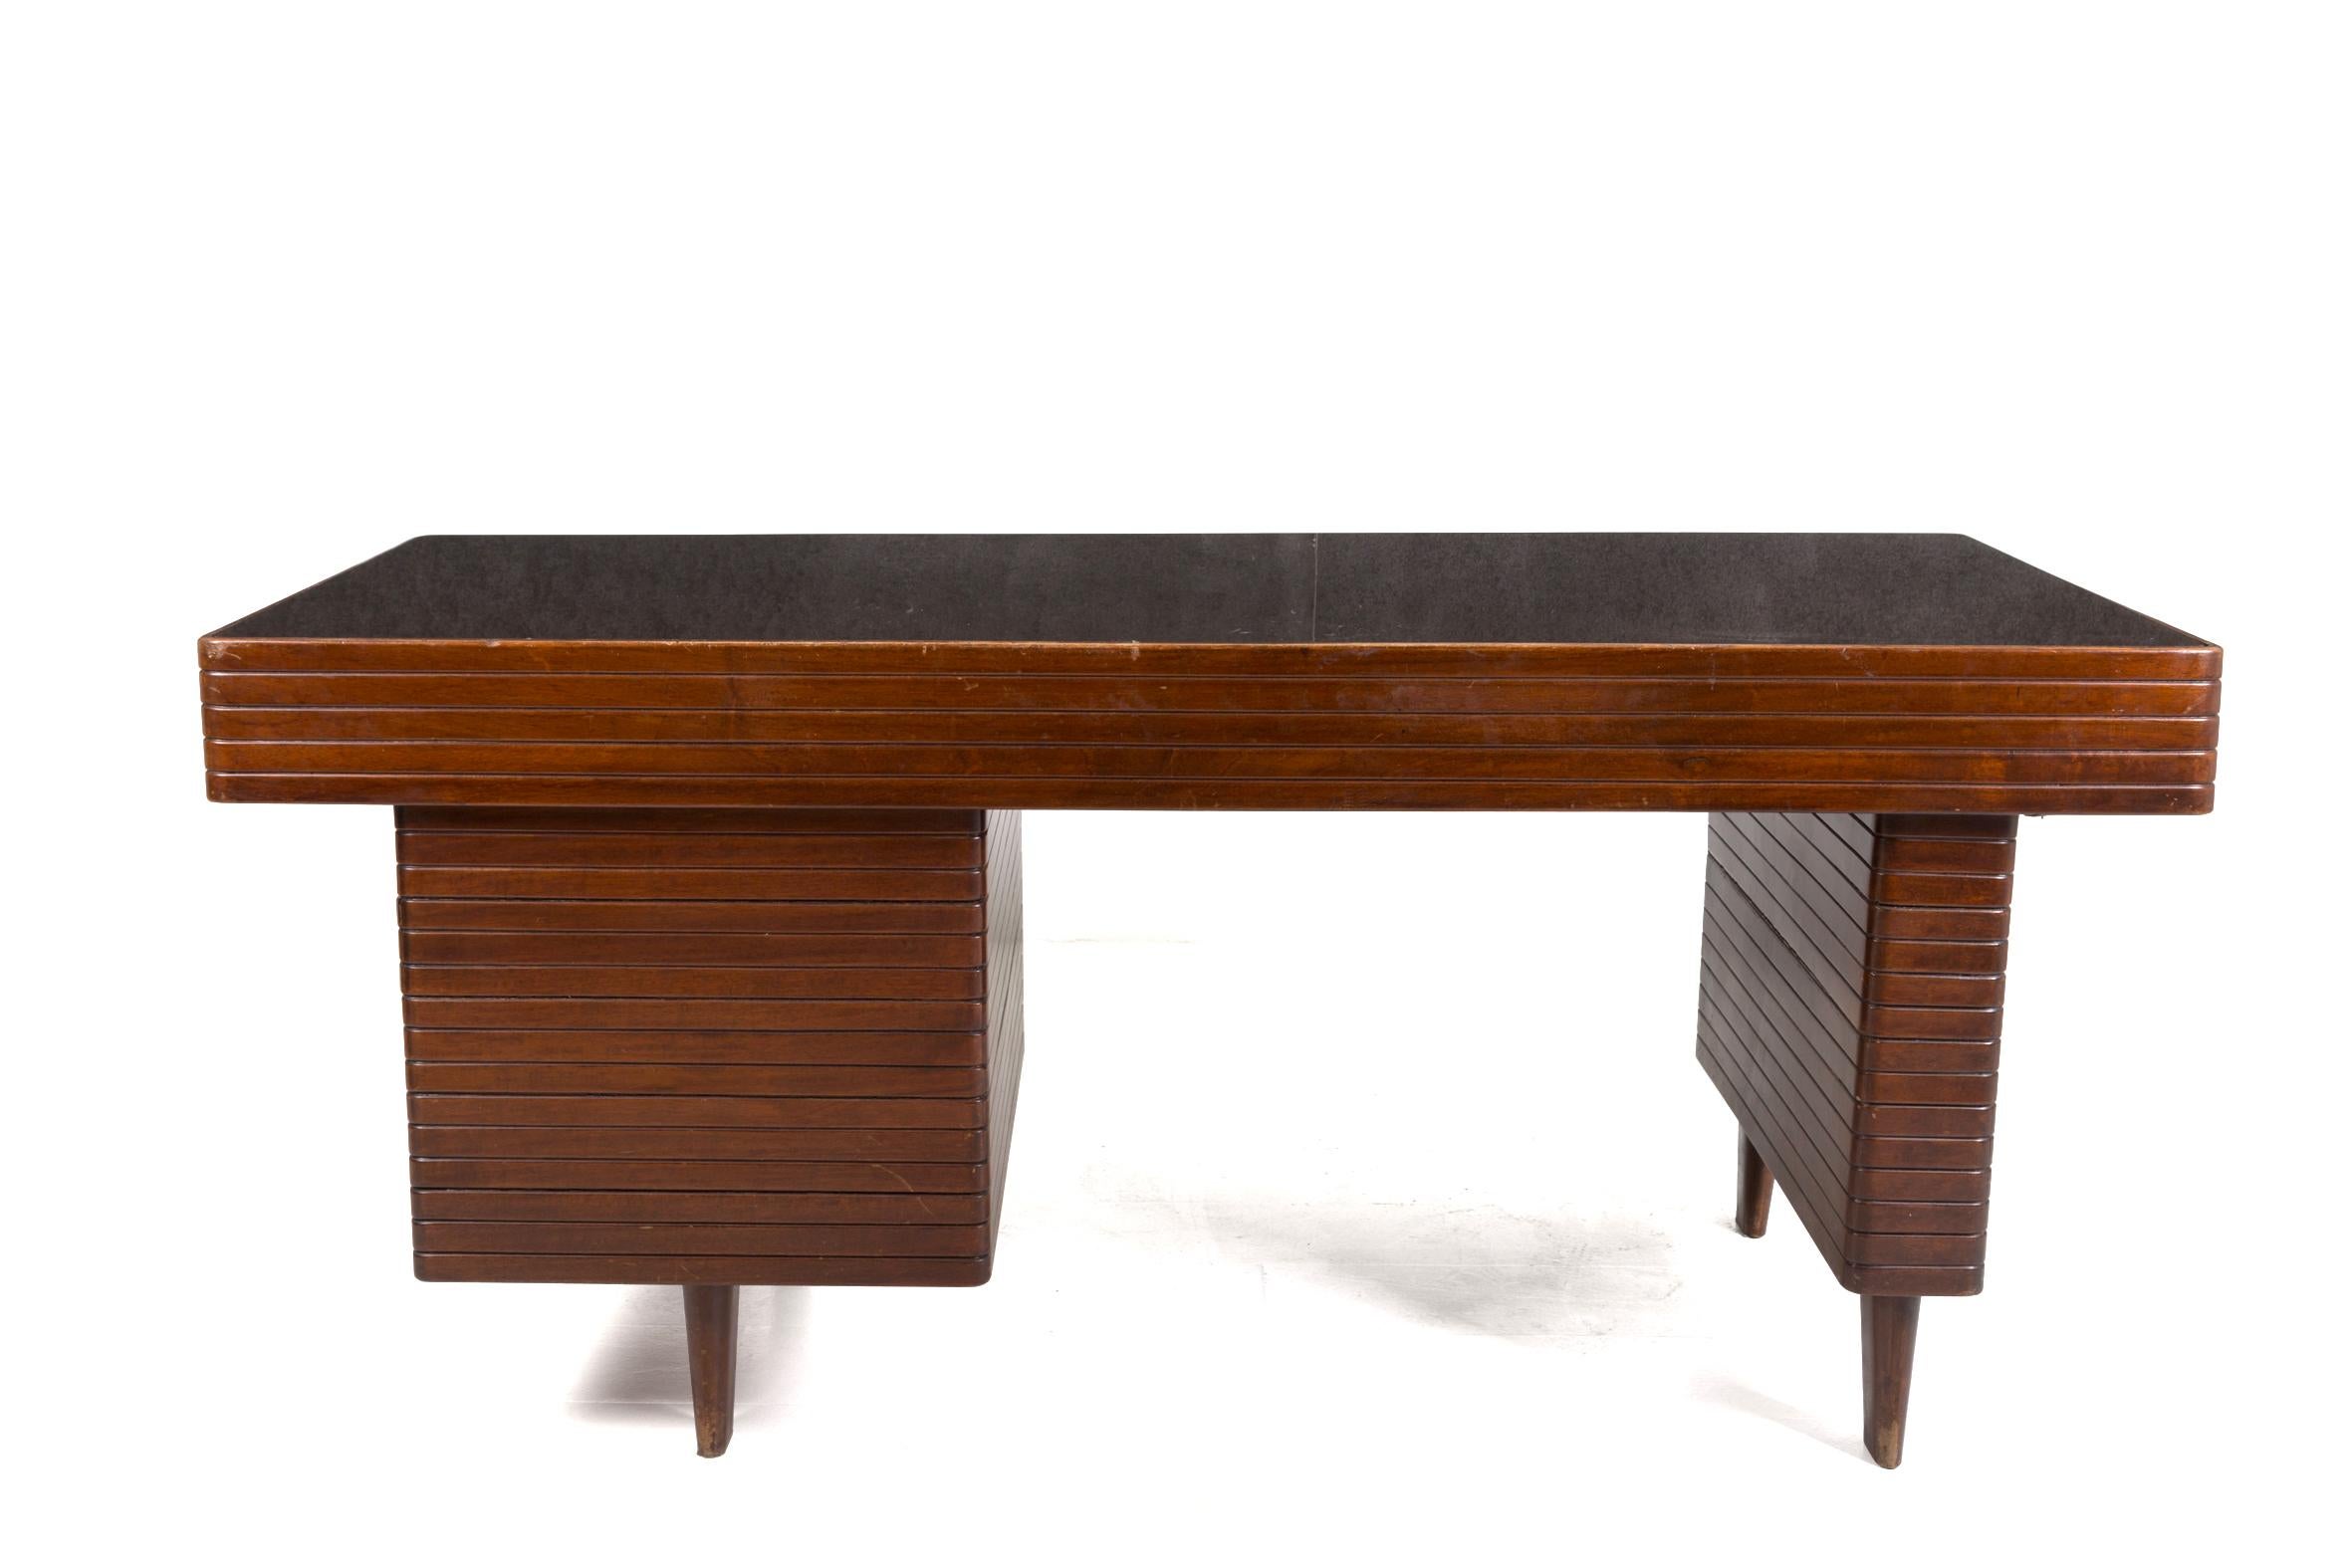 Magnificent desk attributed to Gio Ponti of the 1950s. The desk is made of walnut wood grissinatura. It has been attributed to the great Italian designer because of its realization and its typical lines. The desk has a dark colored glass top that